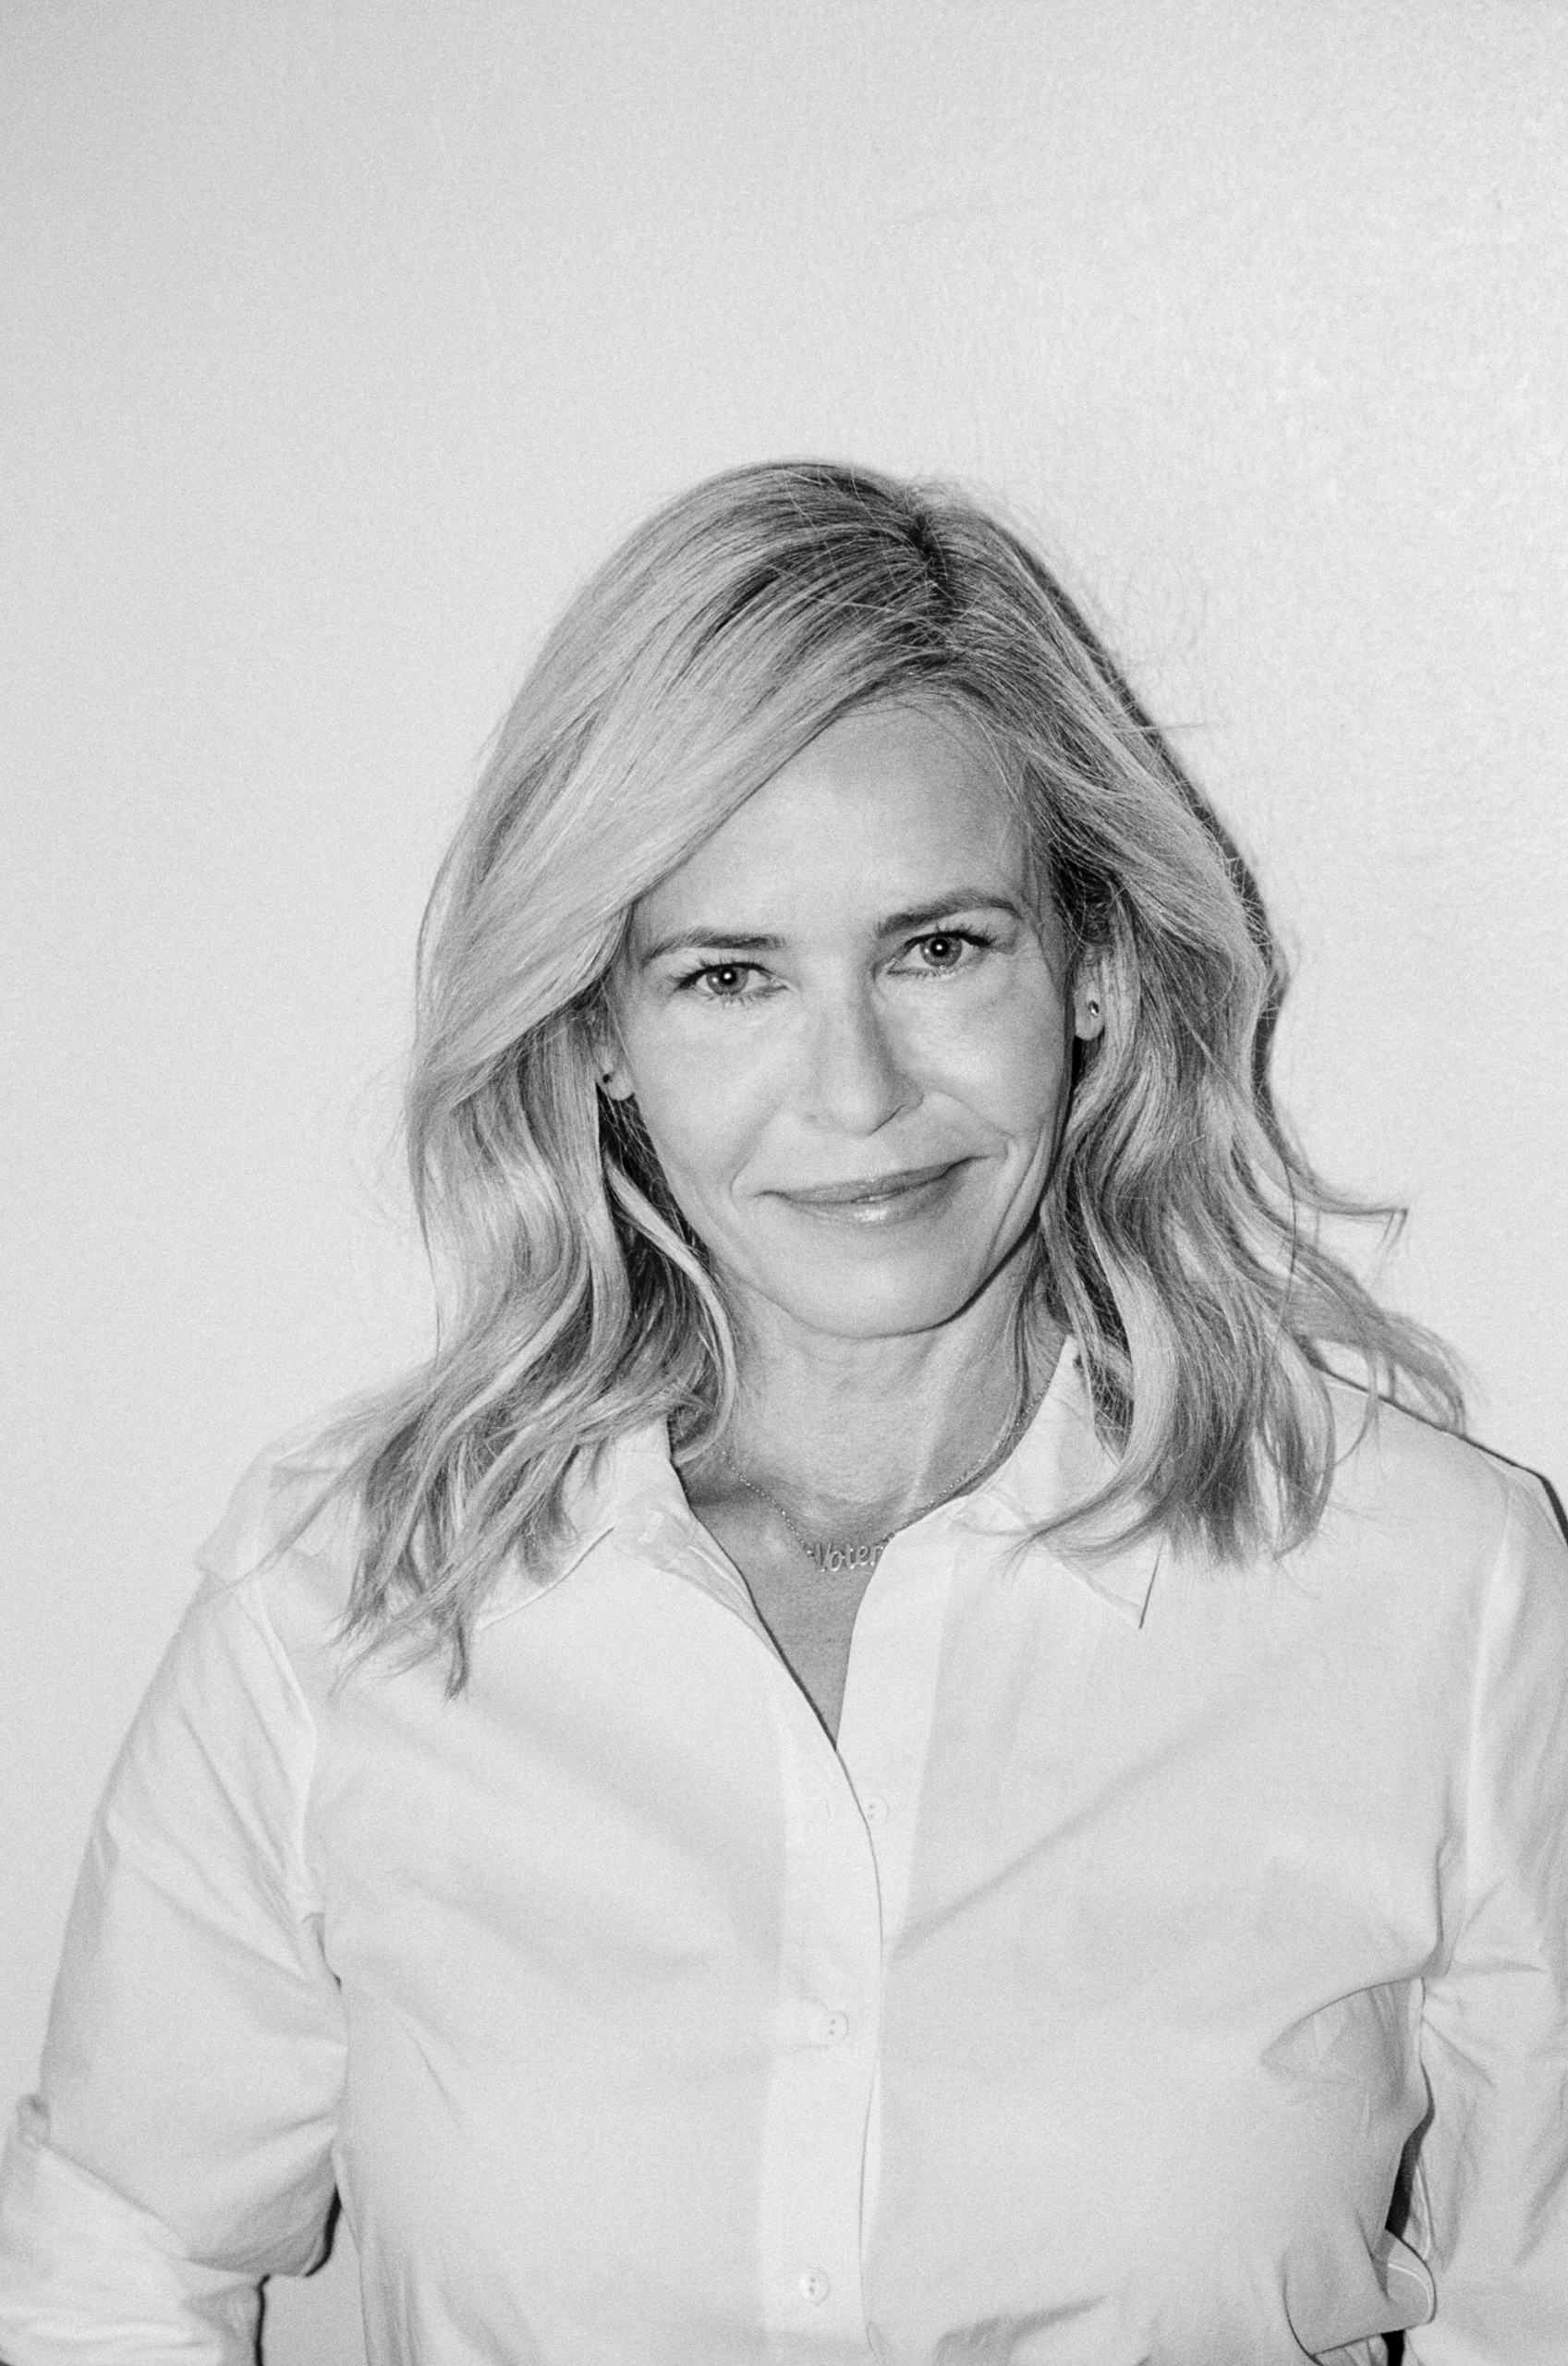 Chelsea Handler On The Hilarious Journey Of Becoming A Better Person